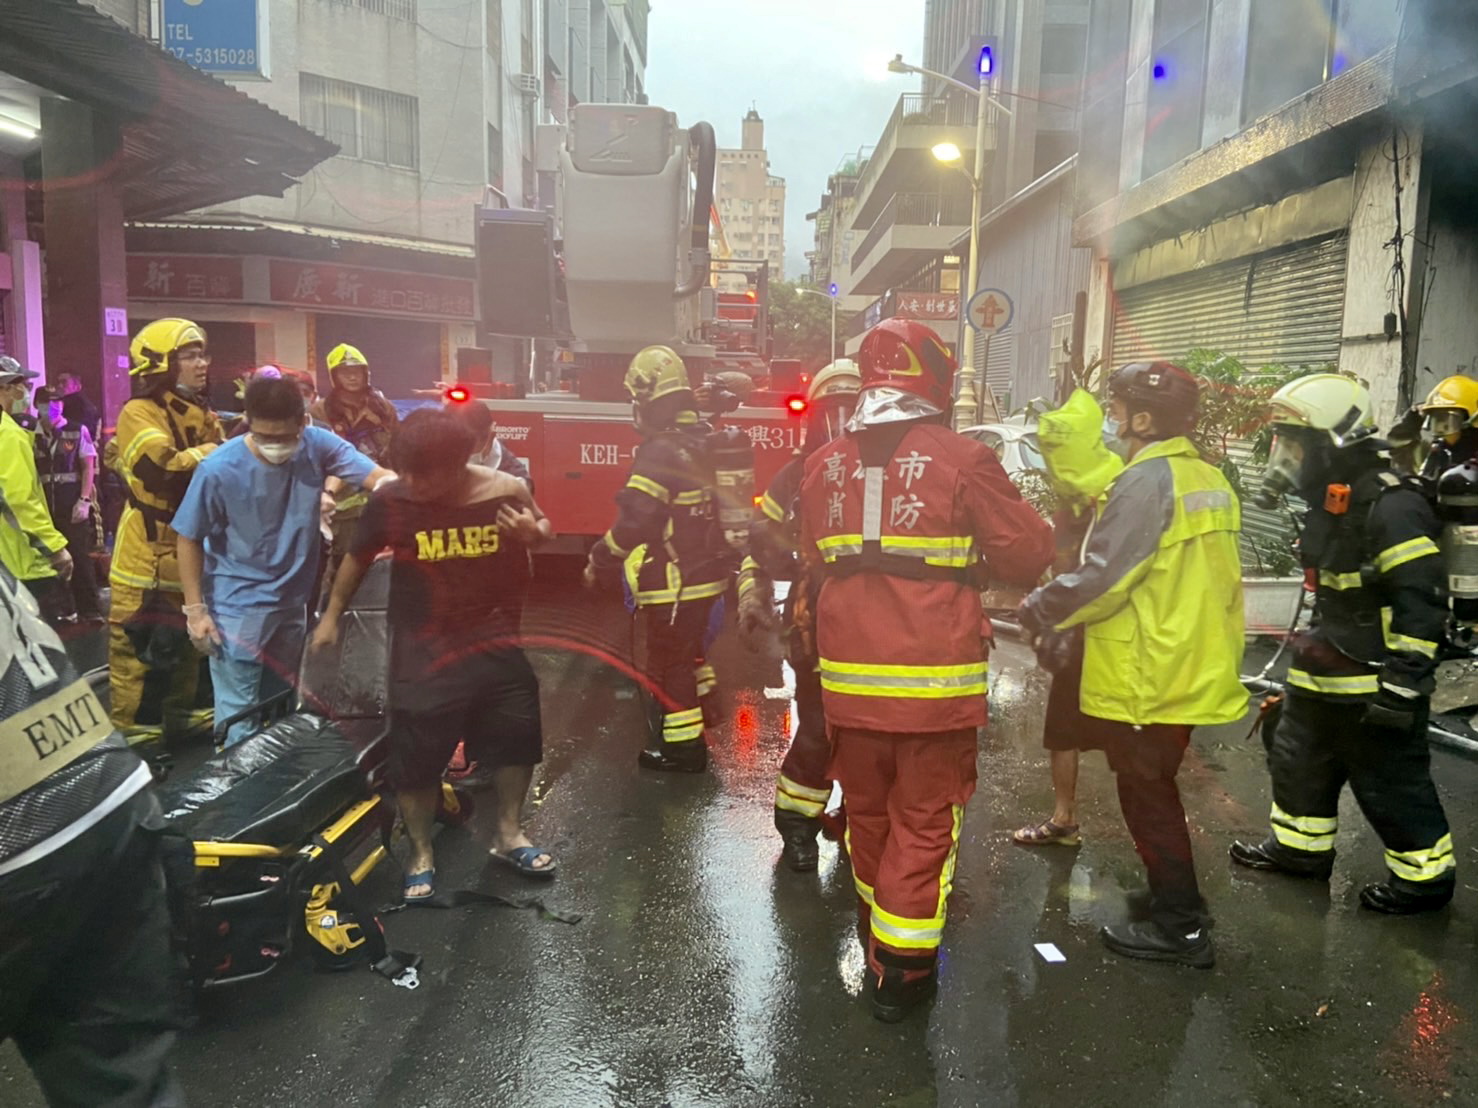 epa09522838 A handout photo made available by Kaohsiung fire bureau shows firefighters and rescuers assisting survivors after a fire on a commercial and residential building in Kaohsiung city, southern Taiwan, 14 October 2021. At least seven persons are dead and several injured after the commercial and residential building fire.  EPA/KAOHSIUNG FIRE BUREAU HANDOUT  HANDOUT EDITORIAL USE ONLY/NO SALES